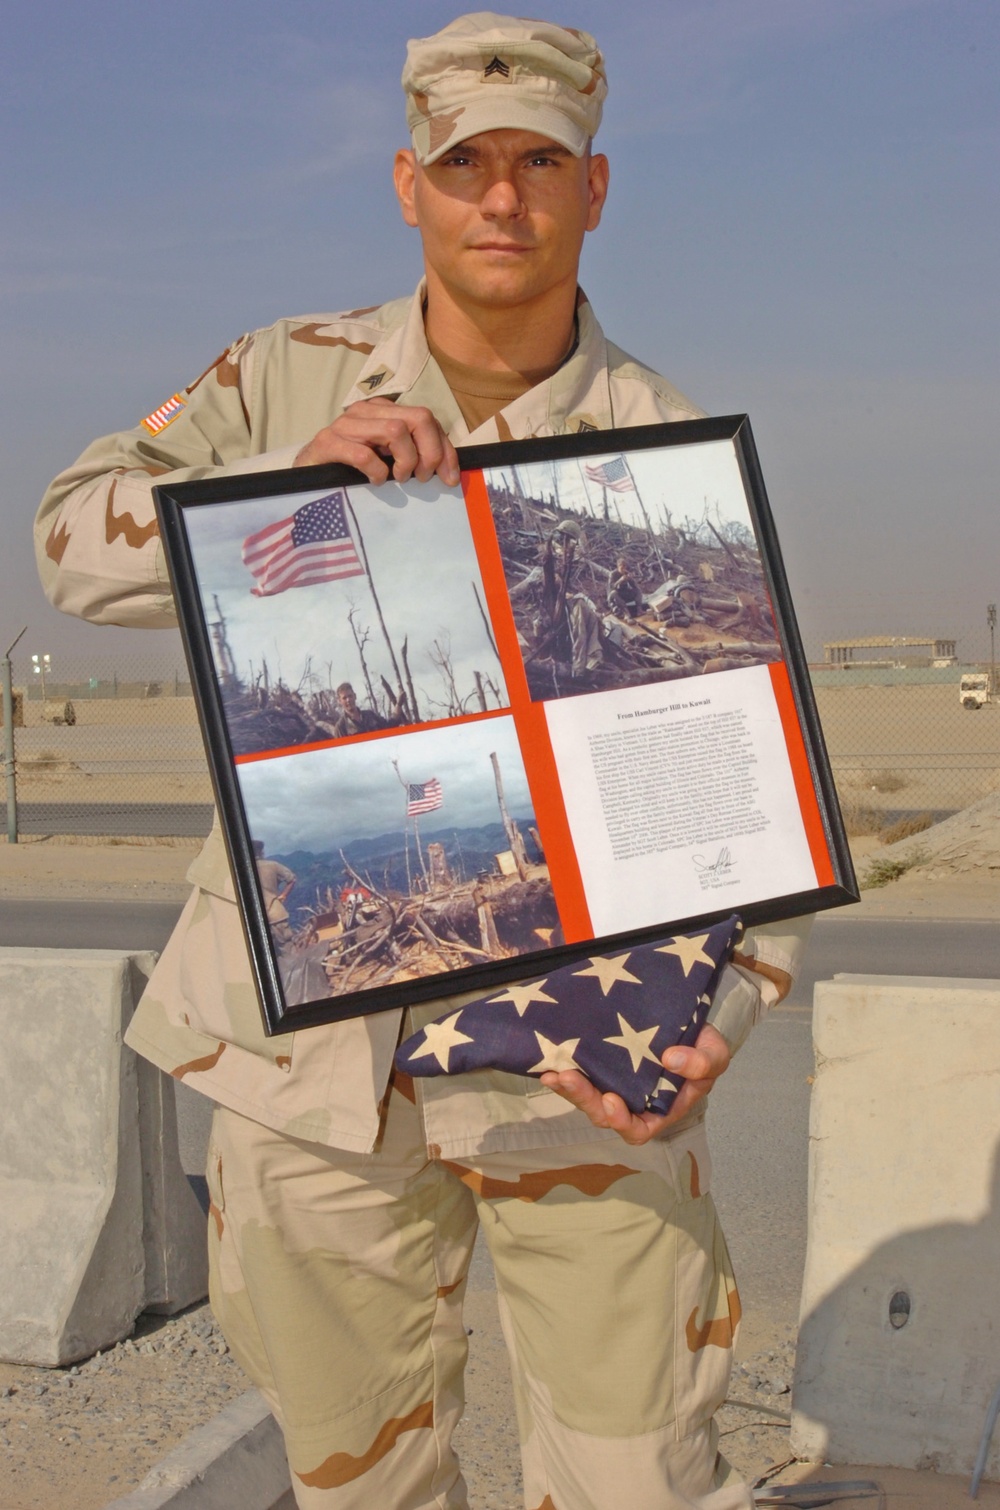 CAMP ARIFJAN, Kuwait - Sgt. Scott Leber, an operations NCO with the 385th Signal Company, holds the flag from &quot;Hamburger Hill&quot; and a plaque containing pictures of his uncle, former Spc. Joe Leber, with the raised flag on the hill in May 1969. Scott flew t